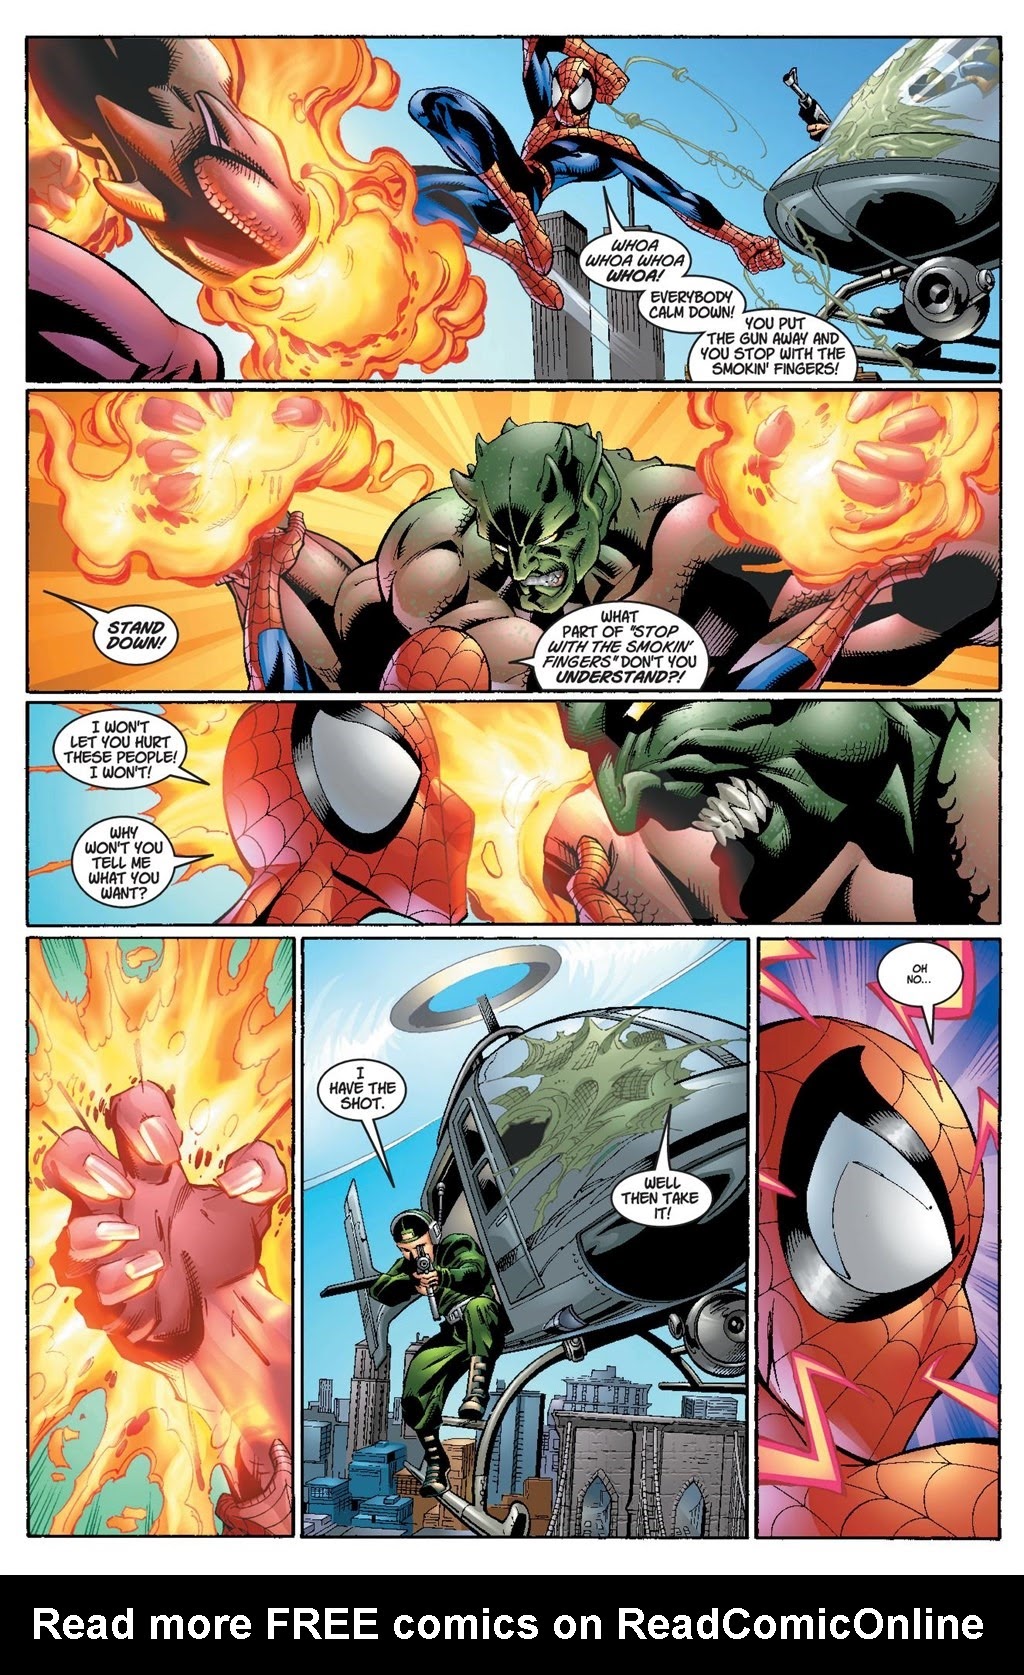 Read online Spider-Man: Spider-Verse comic -  Issue # Fearsome Foes - 76